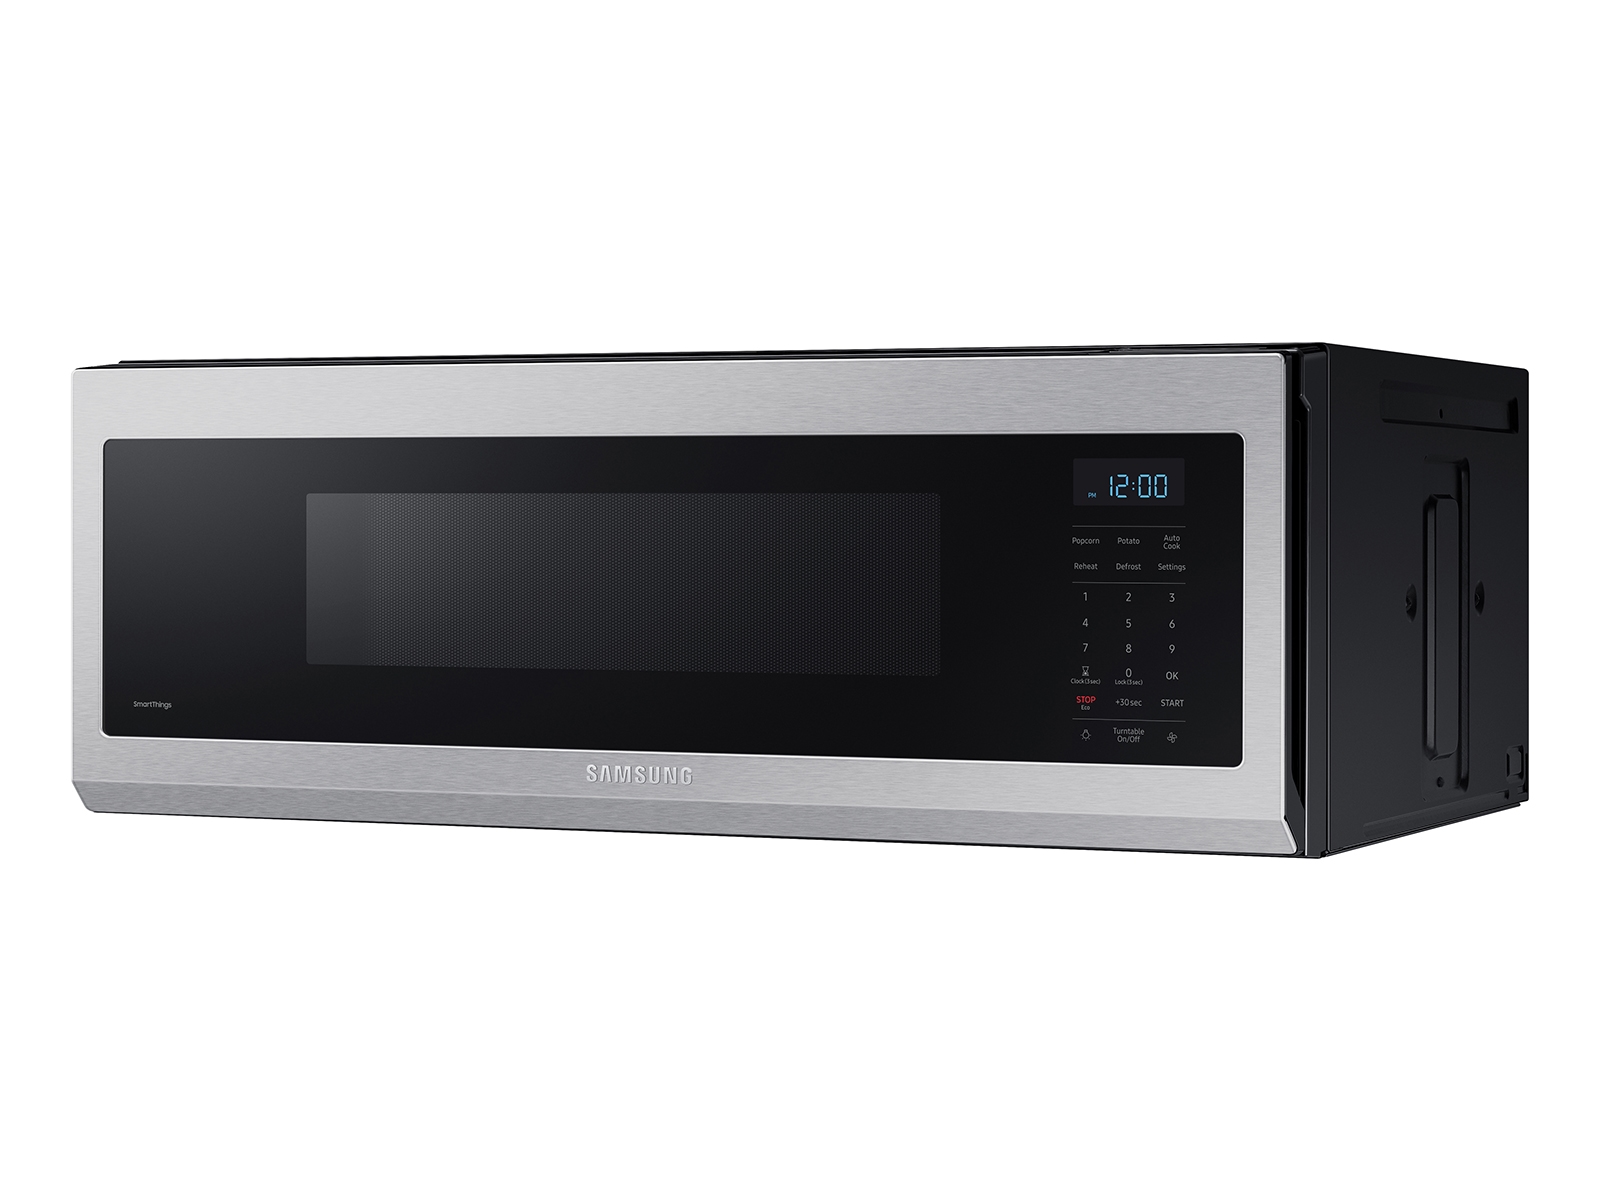 Samsung - 1.1 Cu. ft. Smart Slim Over-the-range Microwave with 400 CFM Hood Ventilation, Wi-Fi & Voice Control - Stainless Steel